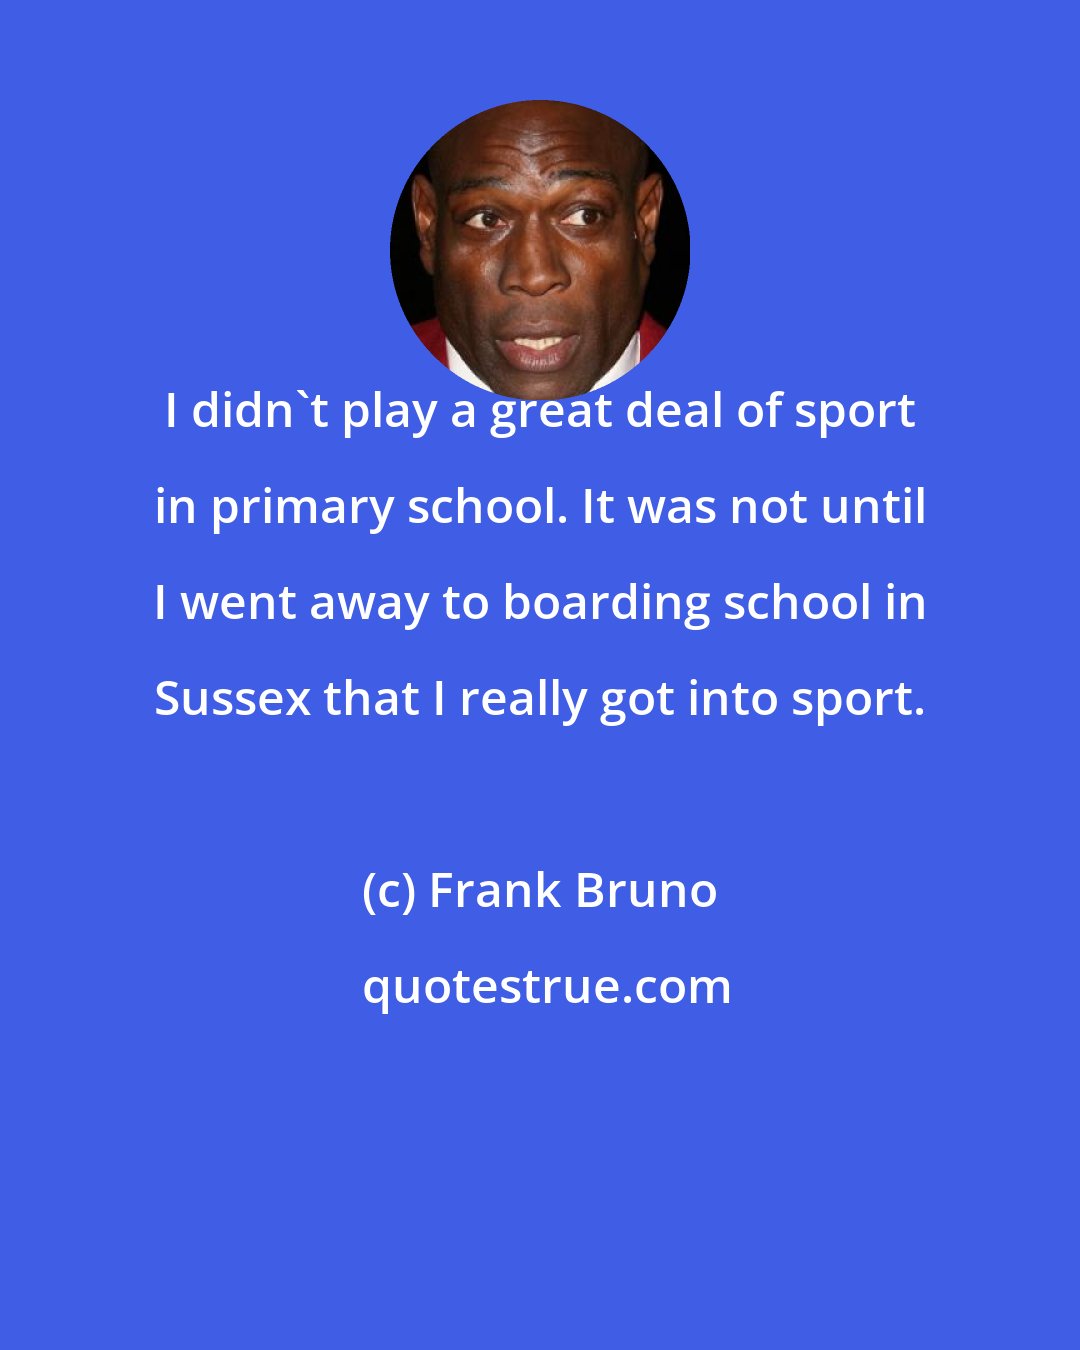 Frank Bruno: I didn't play a great deal of sport in primary school. It was not until I went away to boarding school in Sussex that I really got into sport.